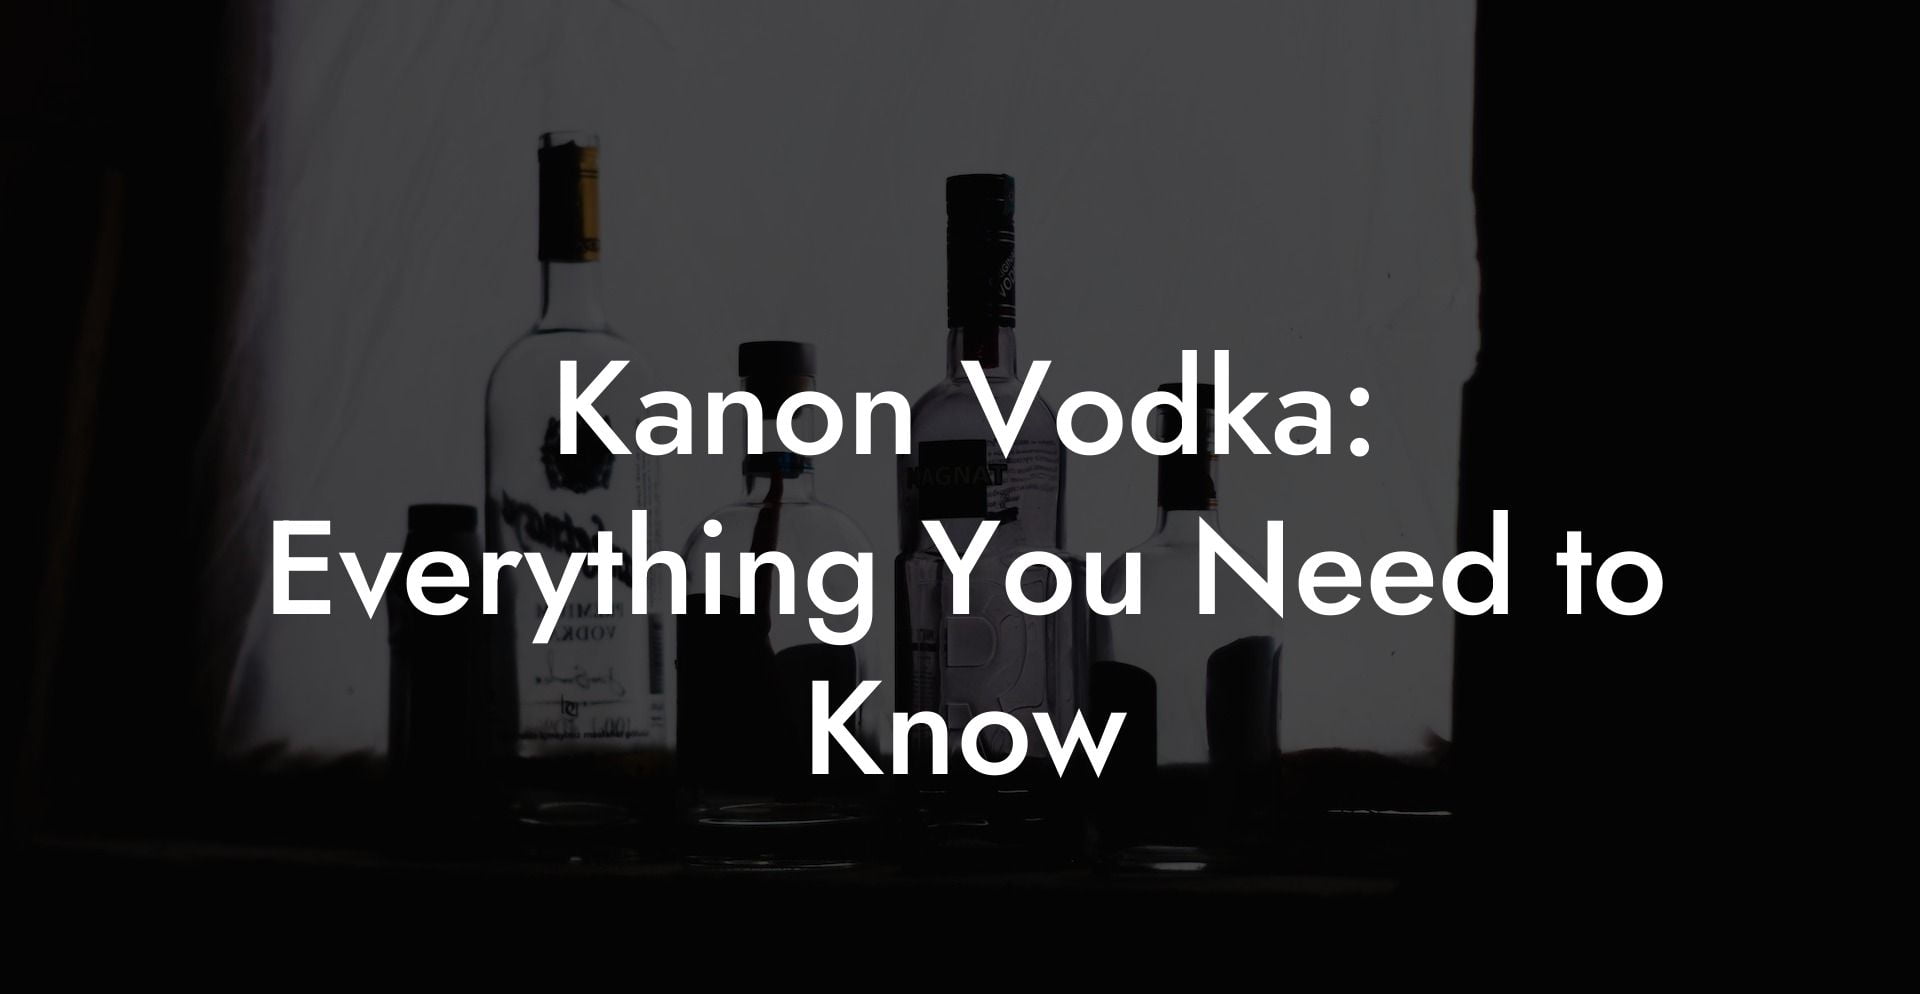 Kanon Vodka: Everything You Need to Know